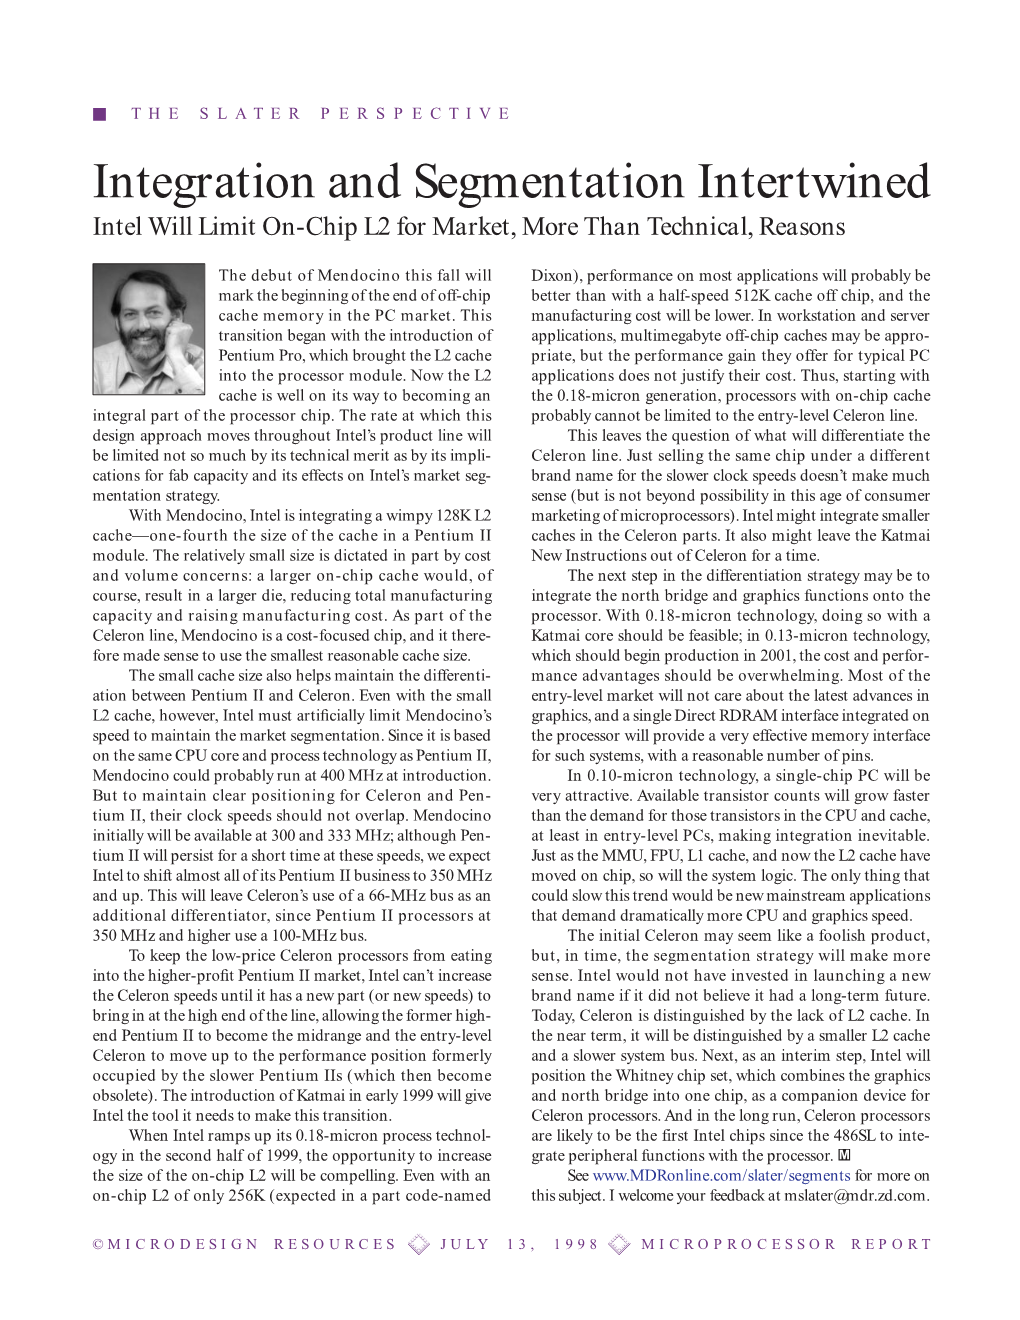 The Slater Perspective: Integration and Segmentation Intertwined: 7